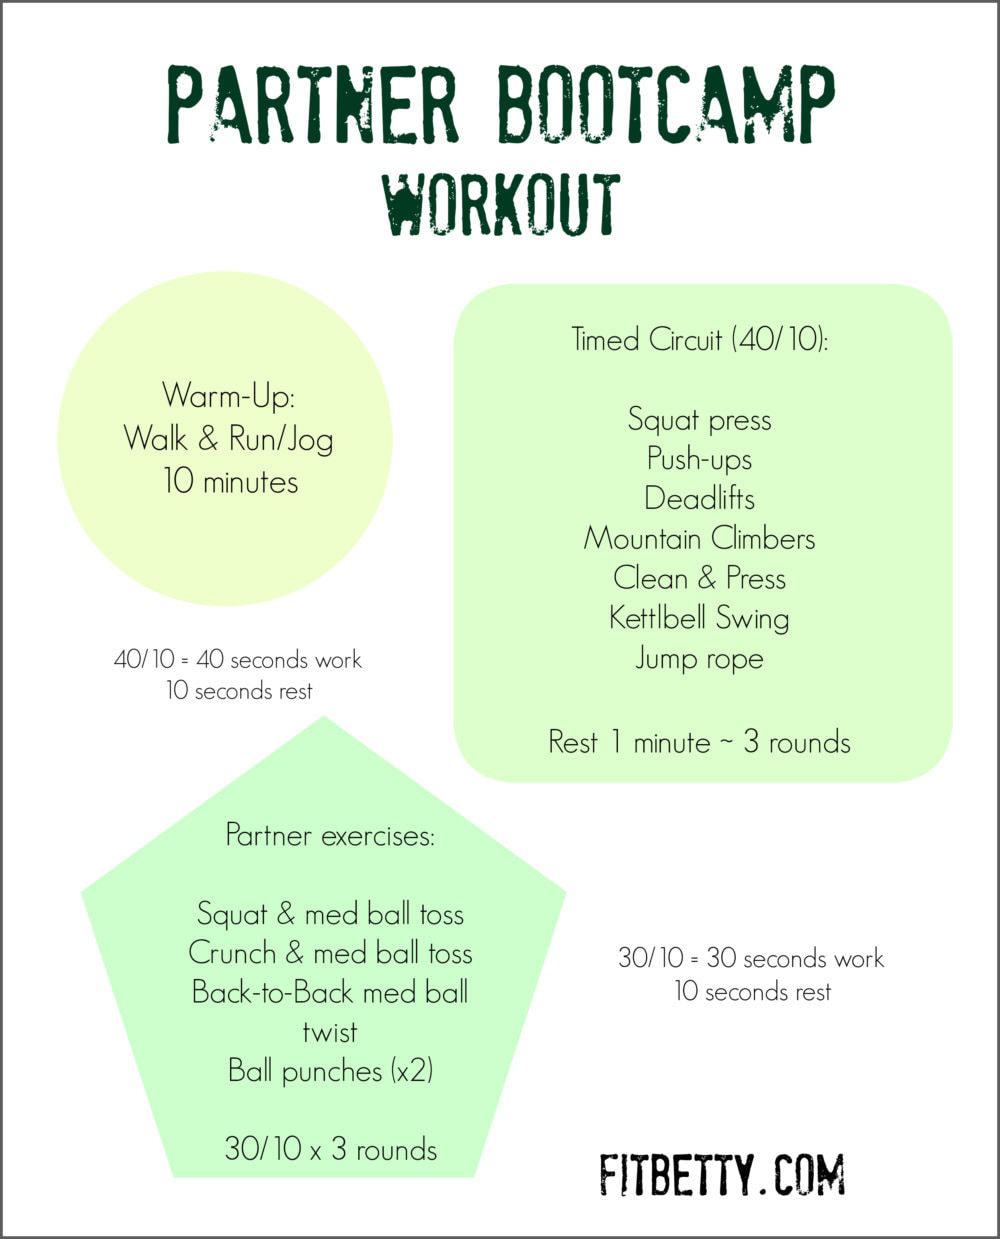 Get Fit with Friends! Partner BootCamp Workouts @Fit_Betty #fitness #workouts #fitfluential 